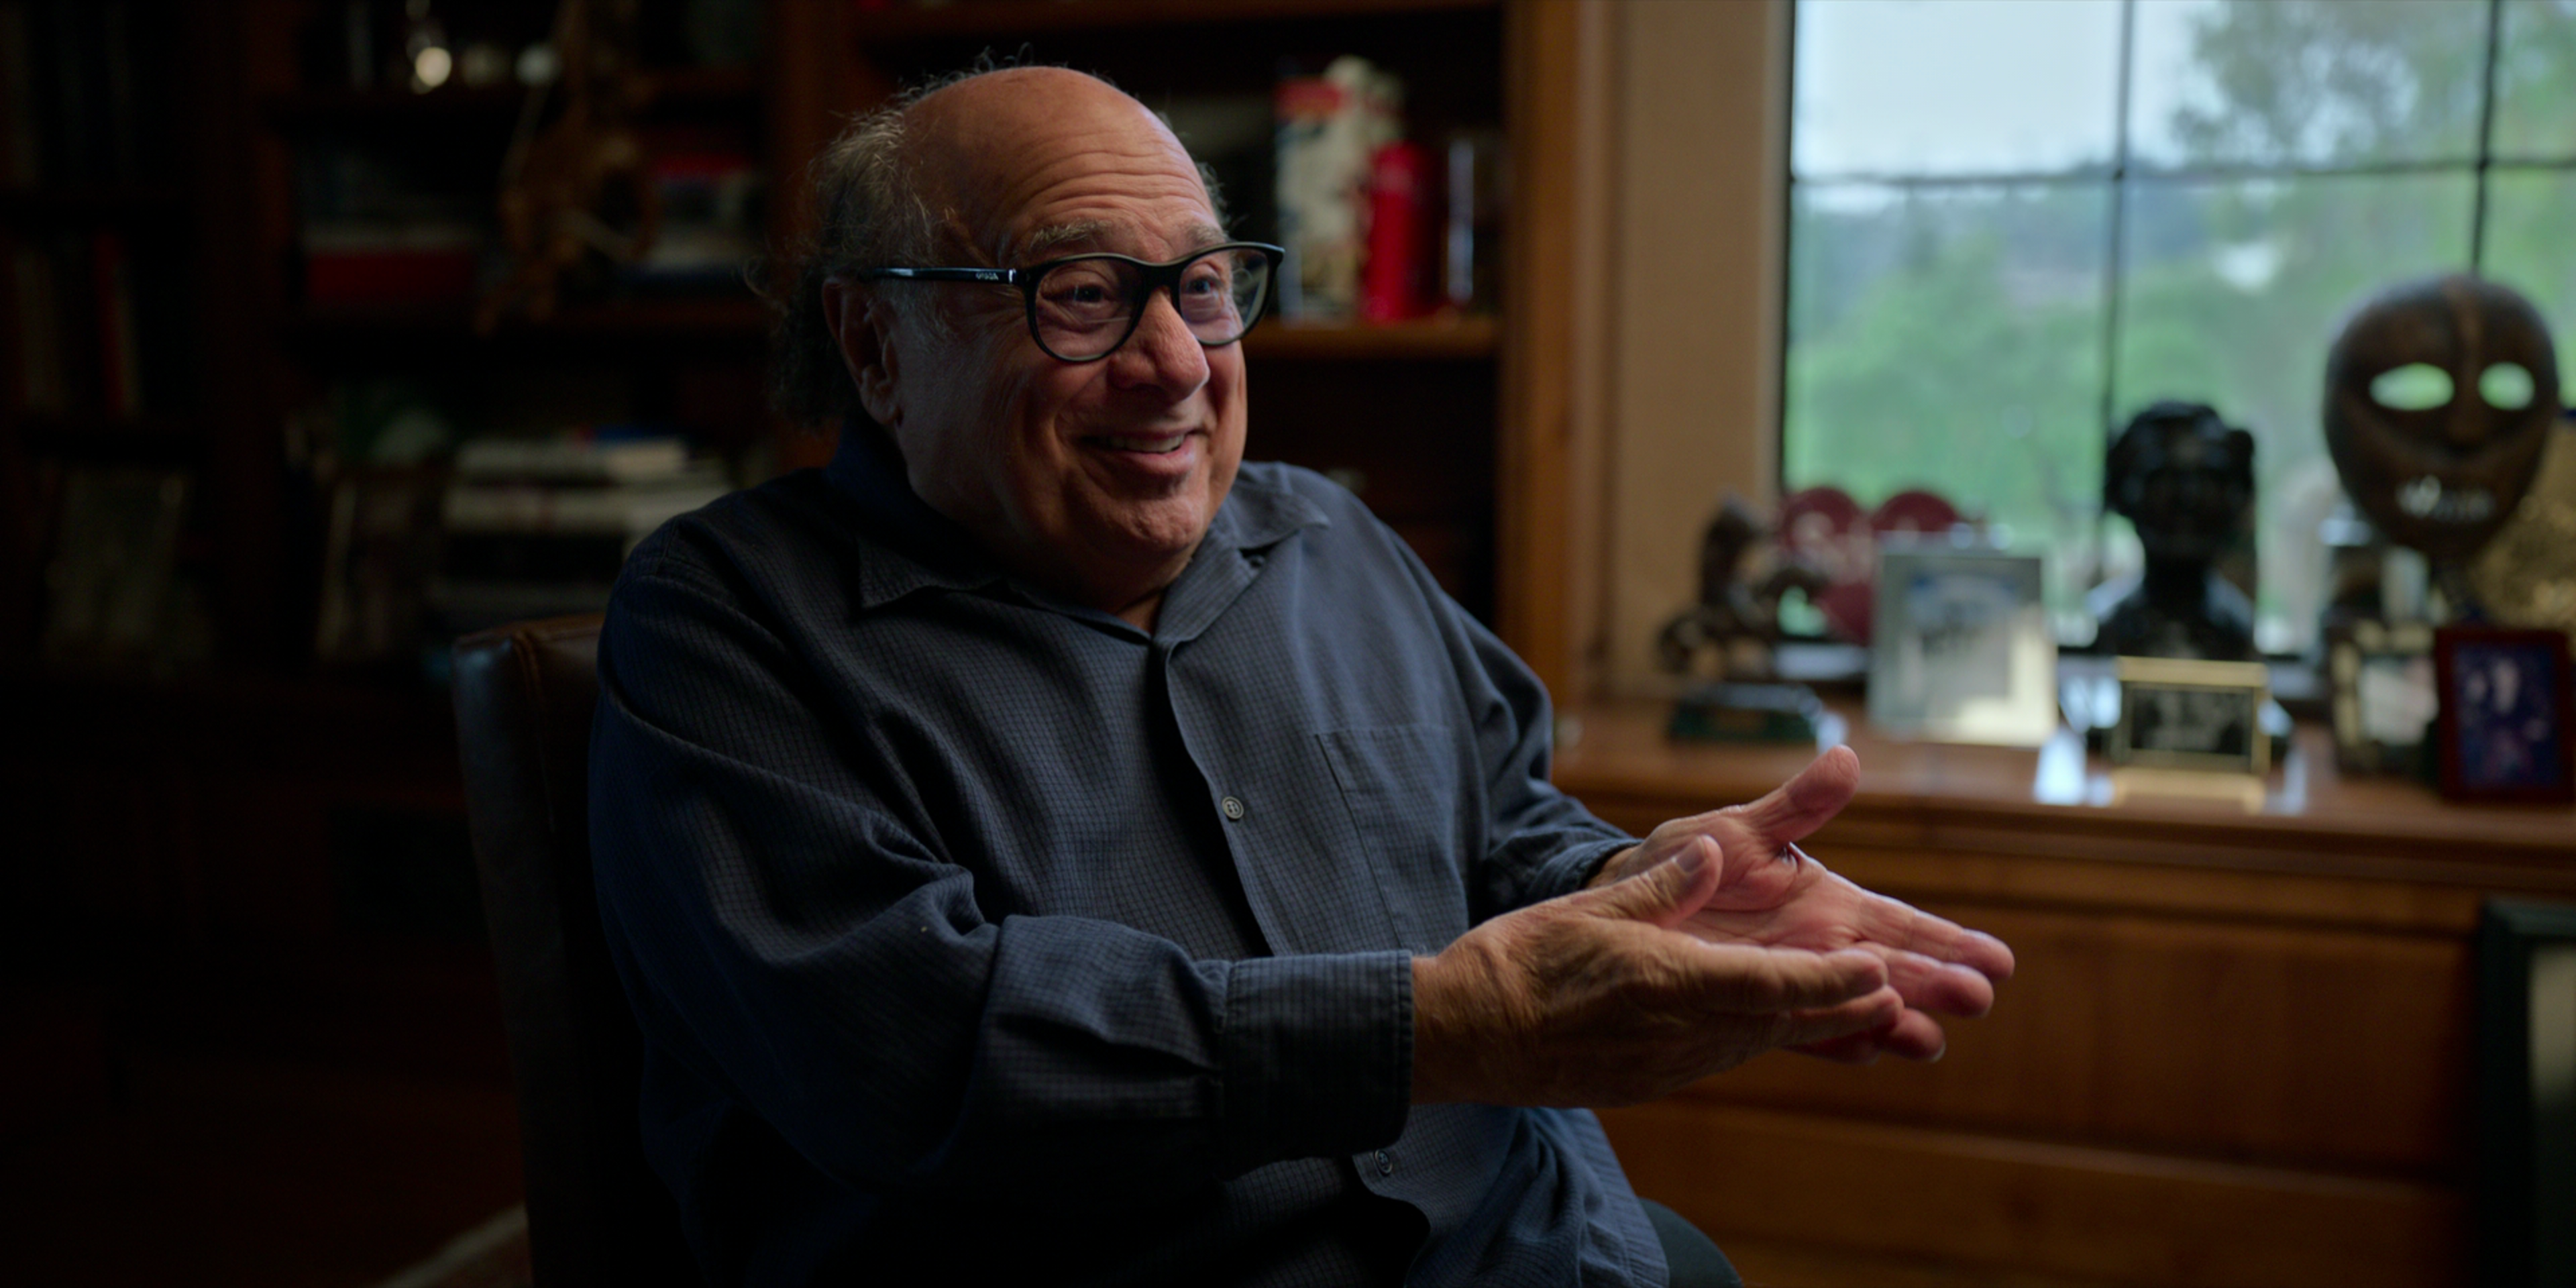 Danny DeVito speaks about being on set with Arnold Schwarzenegger. Image: Netflix / Supplied